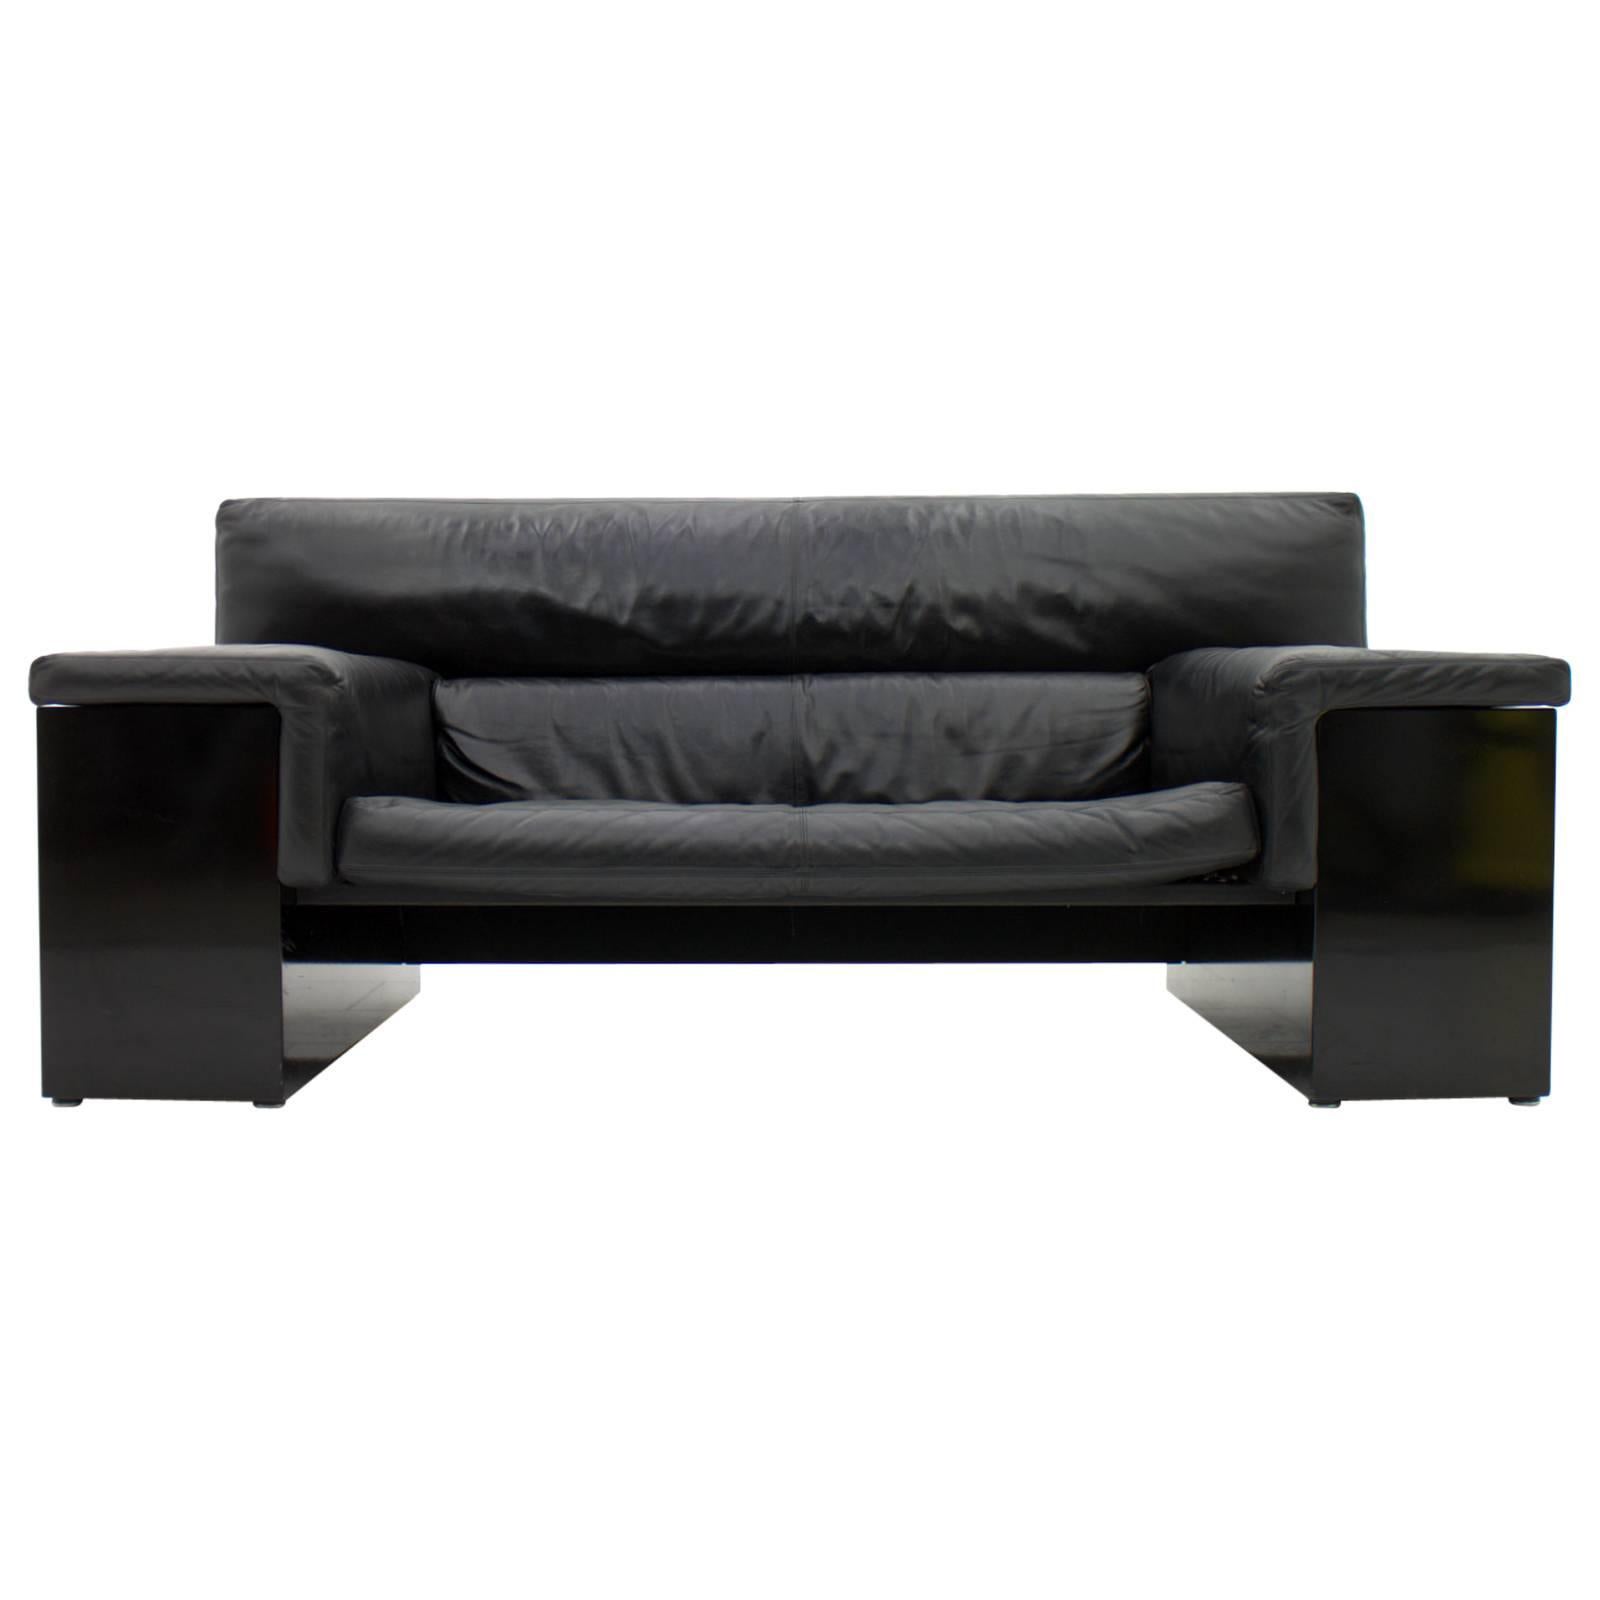 Two Seater Sofa "Brigadier" by Cini Boeri for Knoll 1970`s For Sale